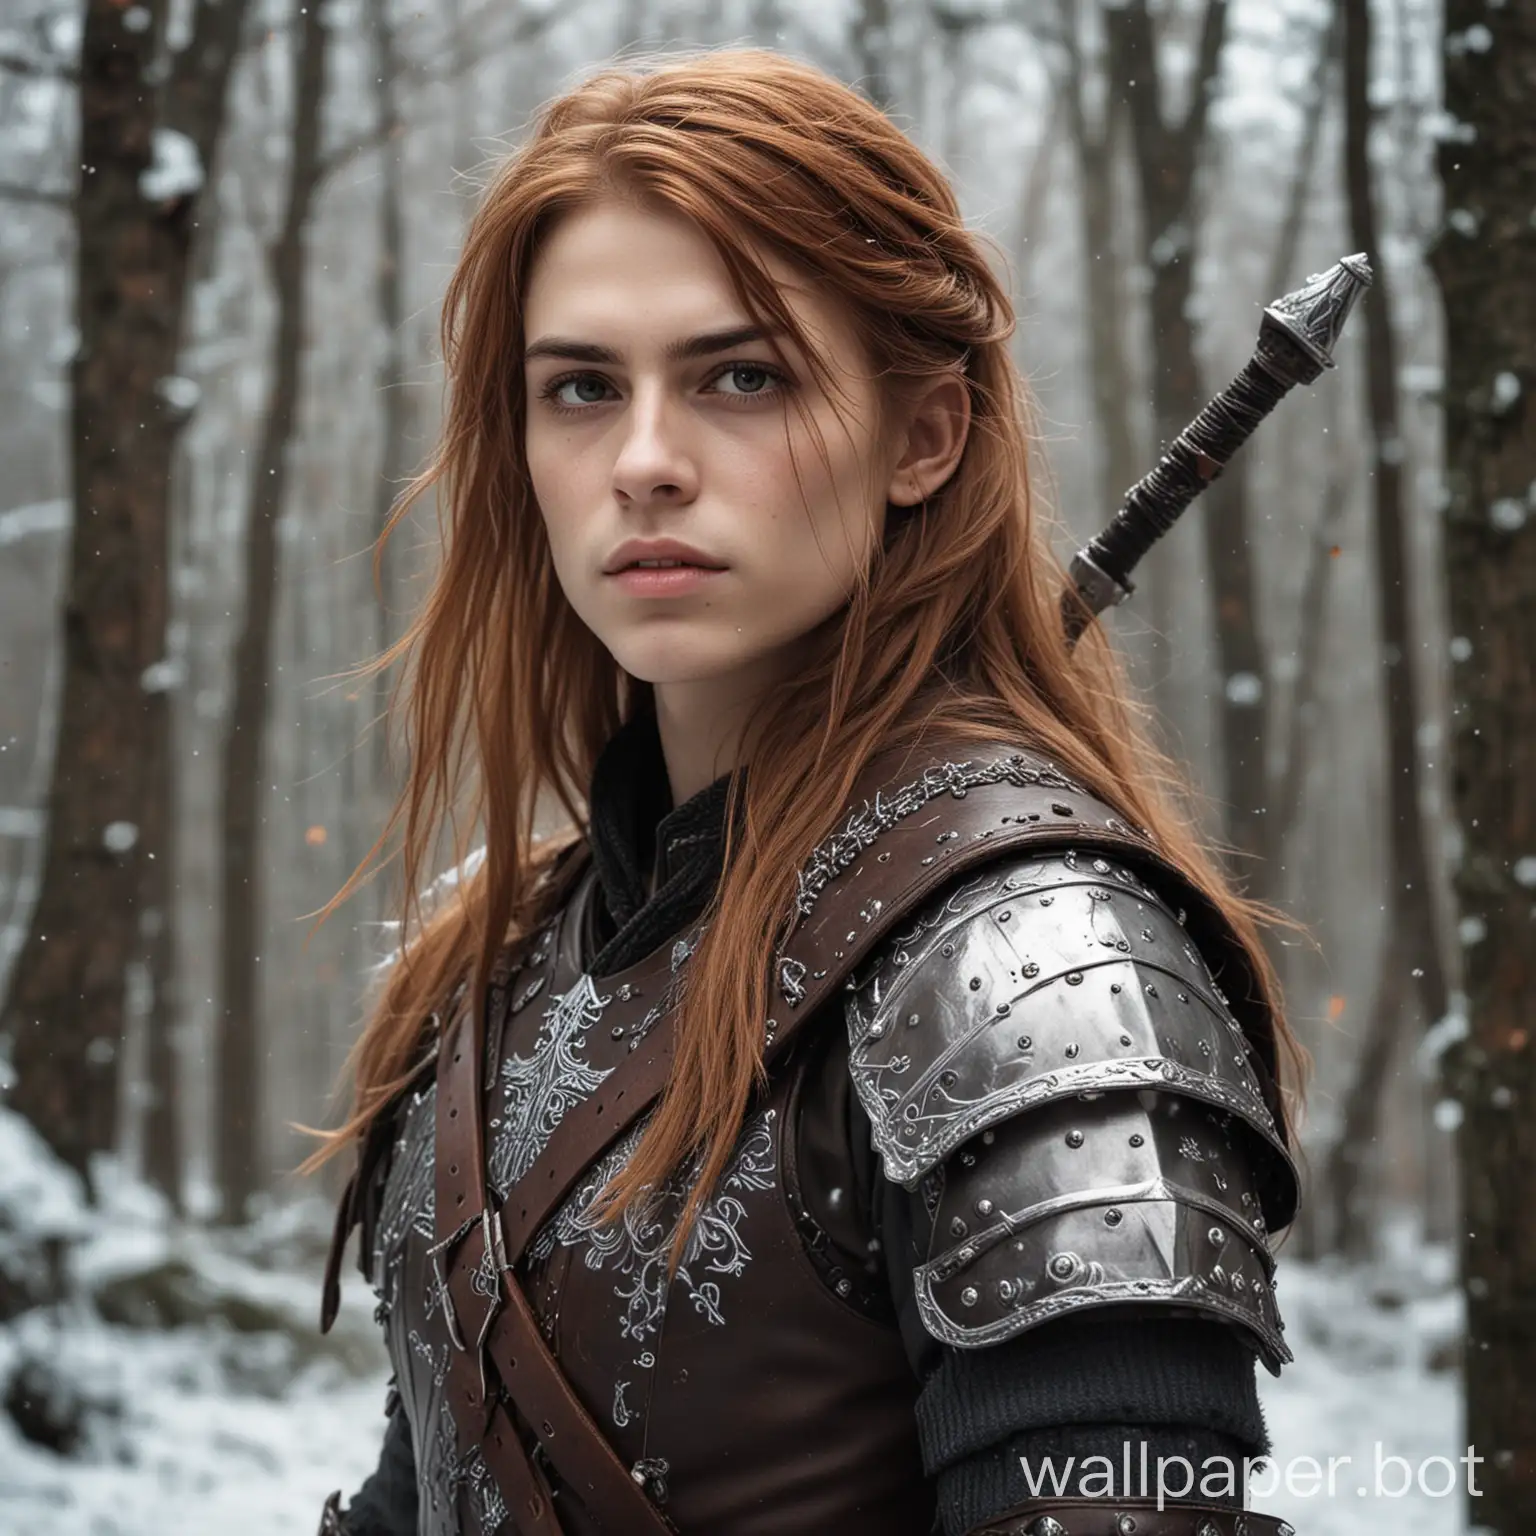 realism. photo. attractive and feminine chestless young man (referred to as 'femboy') of Russian origin with long chestnut hair, wearing armor associated with the character Geralt of Rivia from the Witcher series, with two swords on his back, located in a close-up portrait in the midst of a snowy Irish forest during autumn